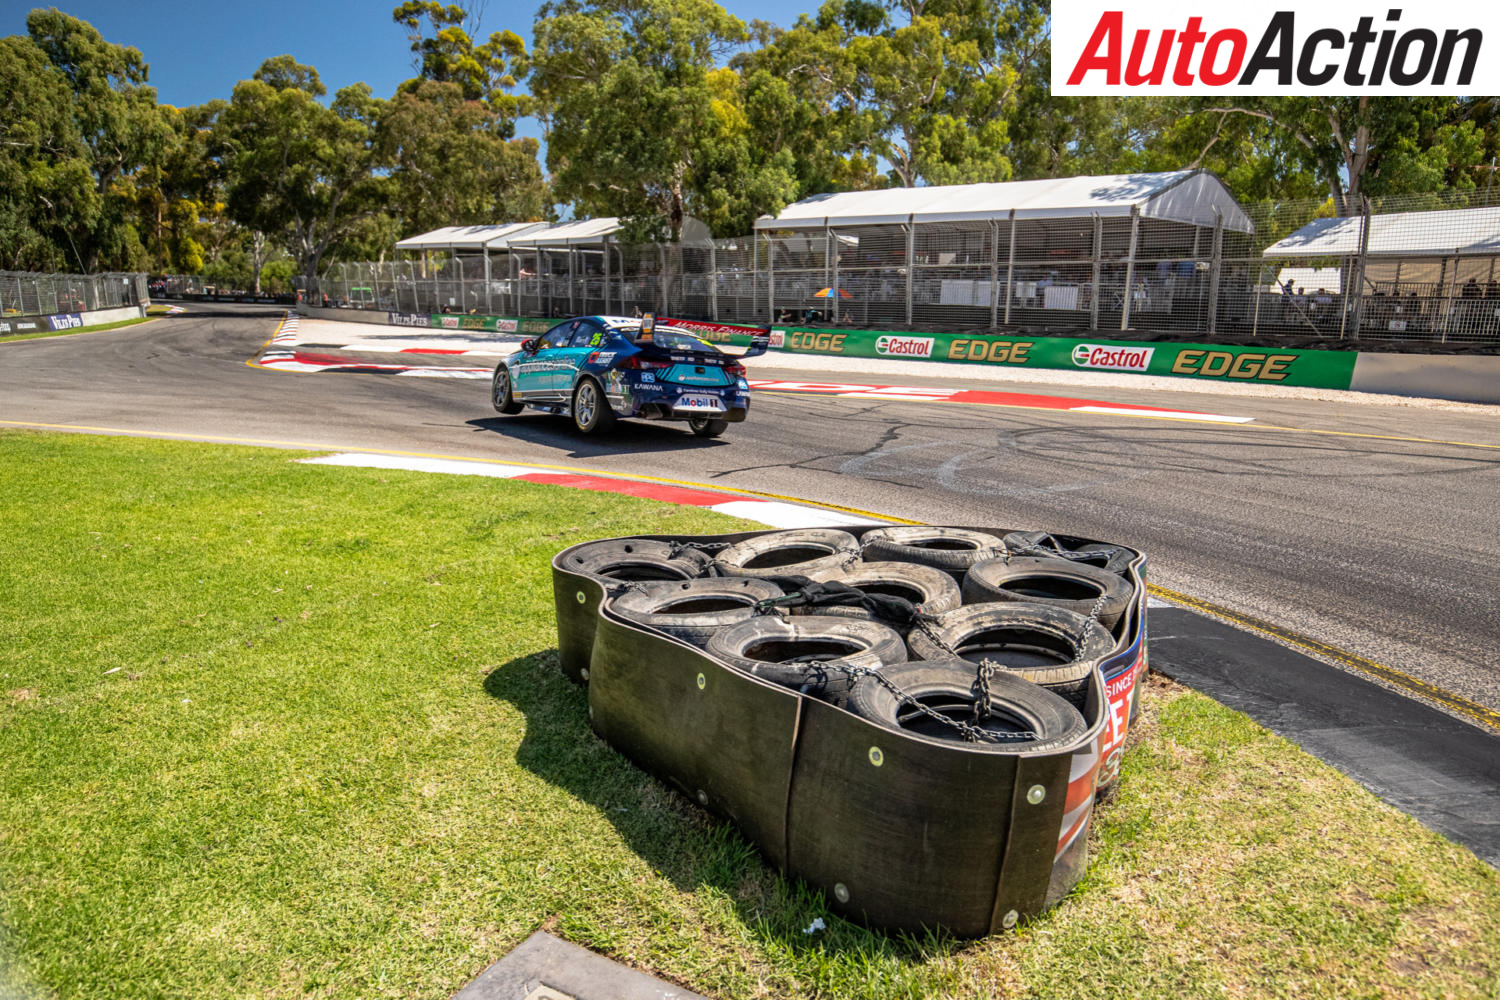 Fate of Adelaide street circuit could be decided tomorrow - Image: InSyde Media